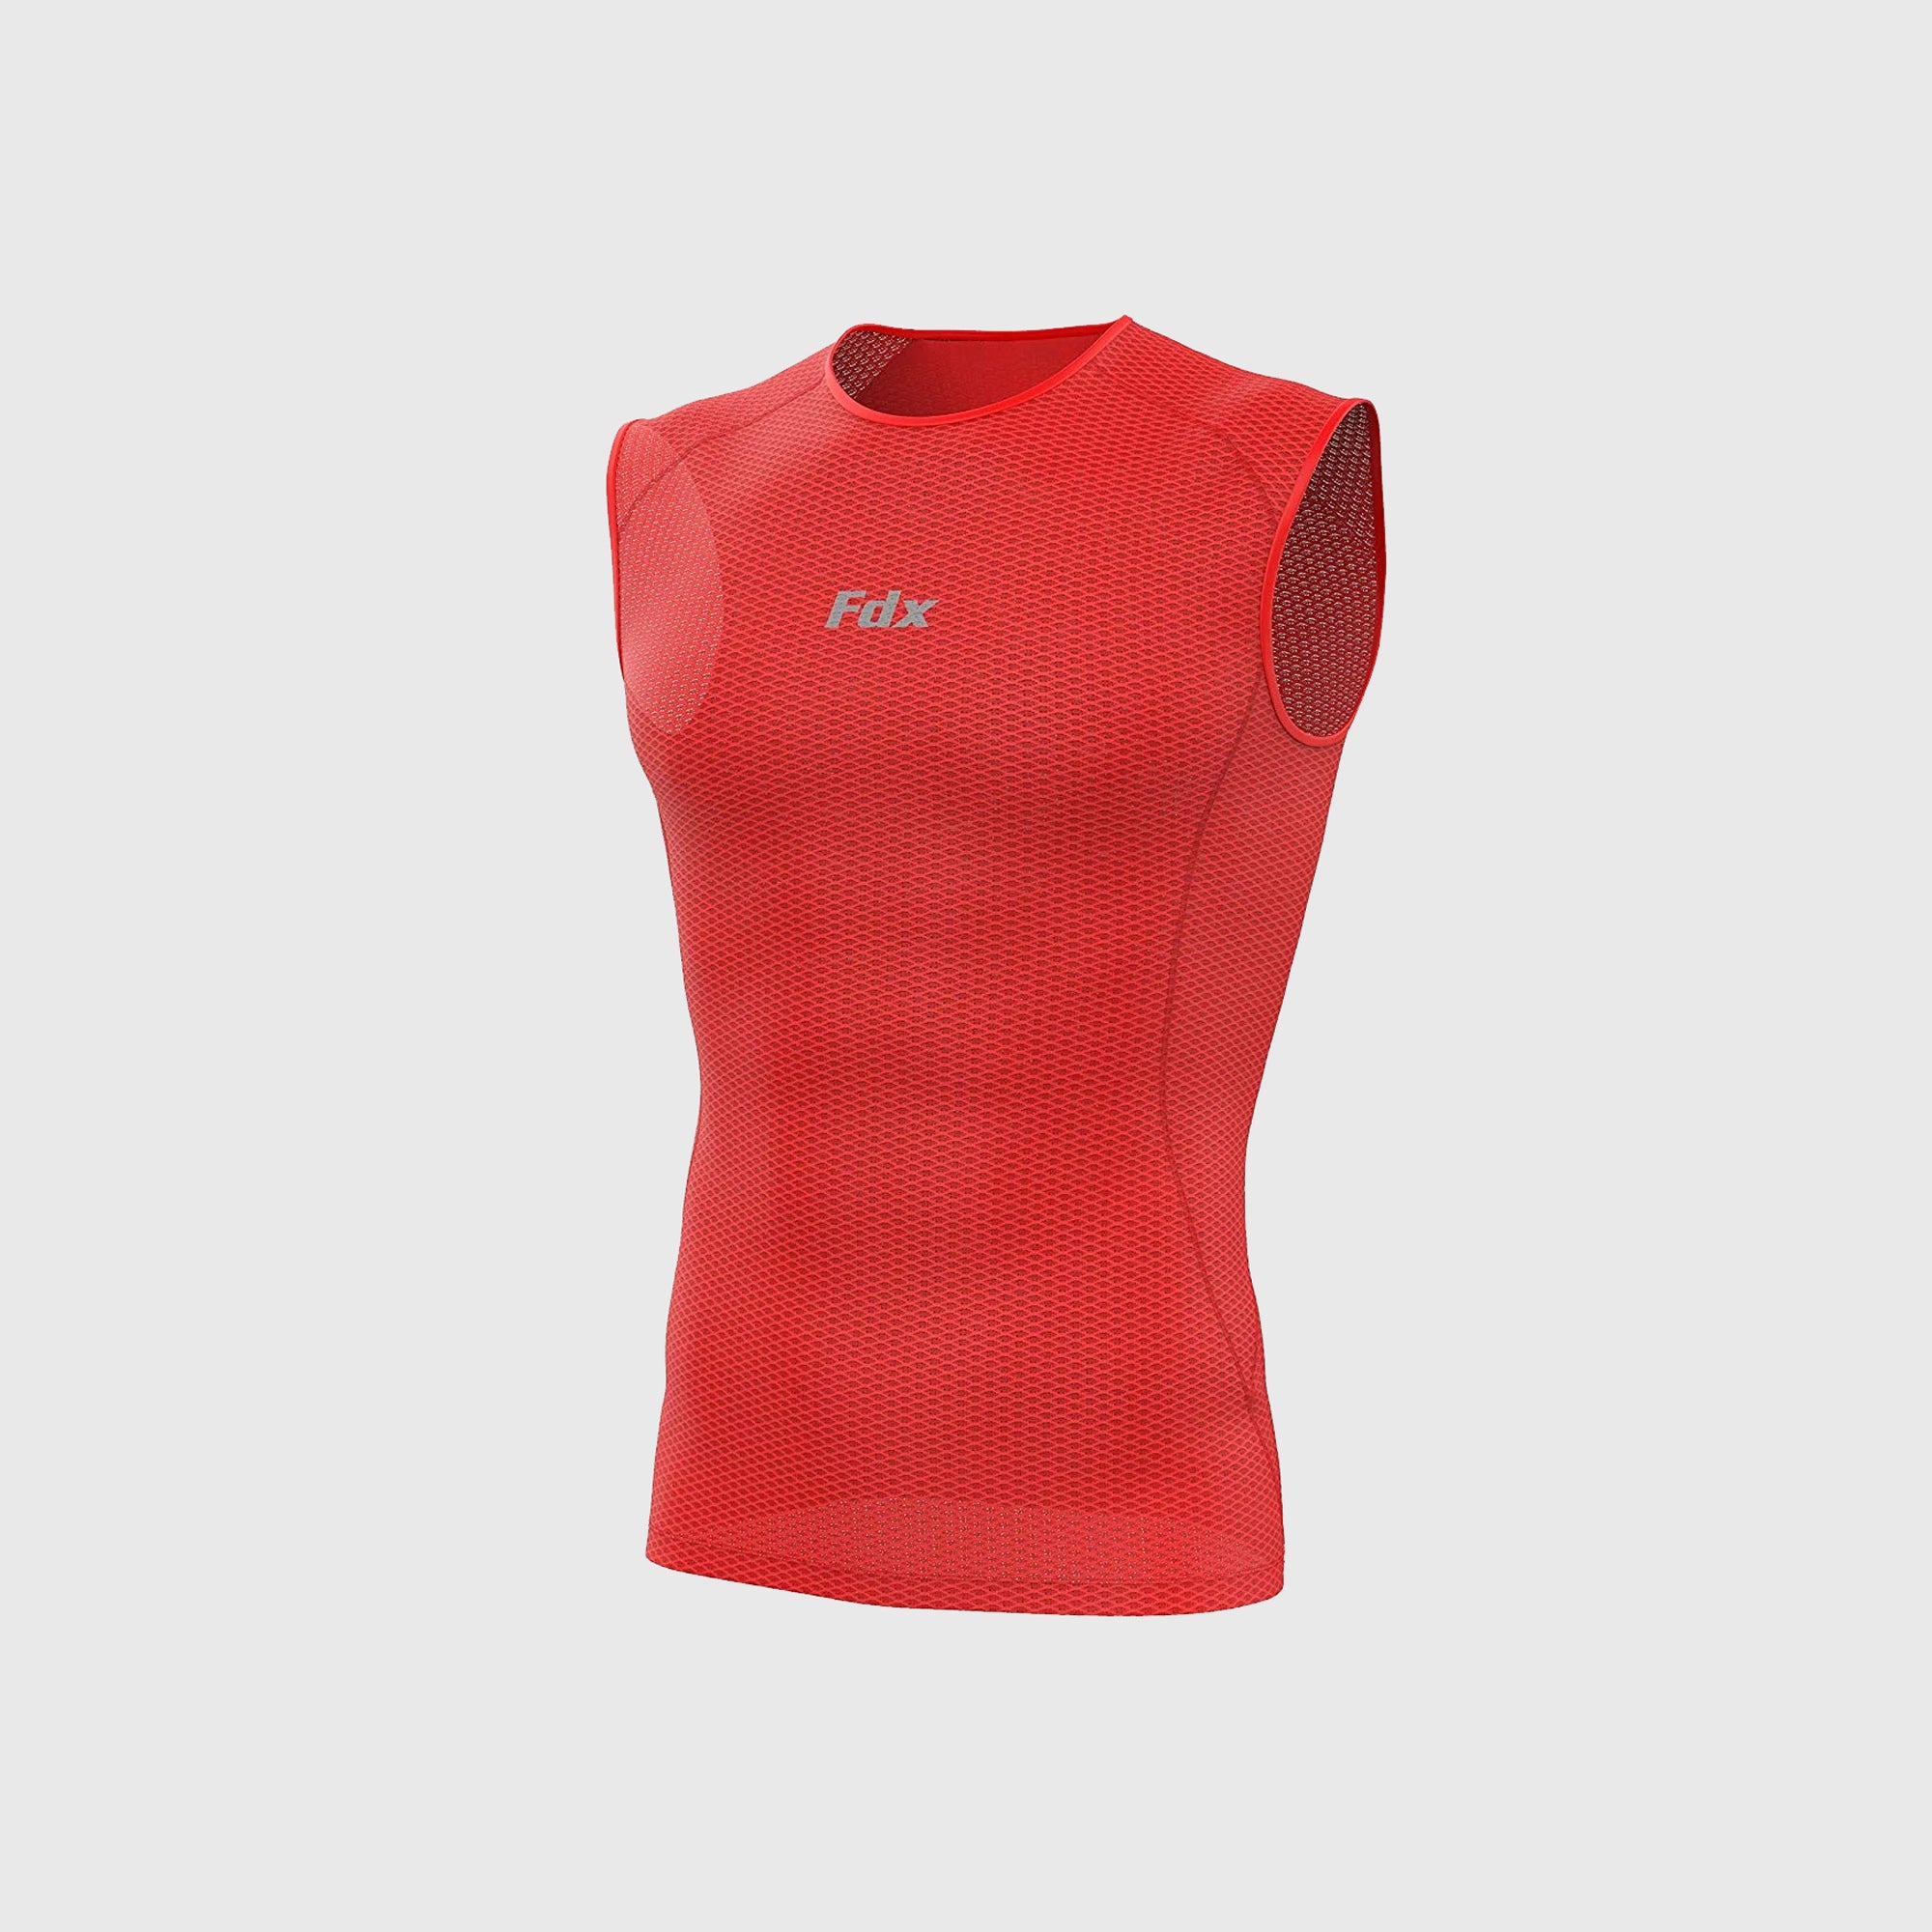 Fdx Mens Red Sleeveless Mesh Compression Top Running Gym Workout Wear Rash Guard Stretchable Breathable - Aeroform